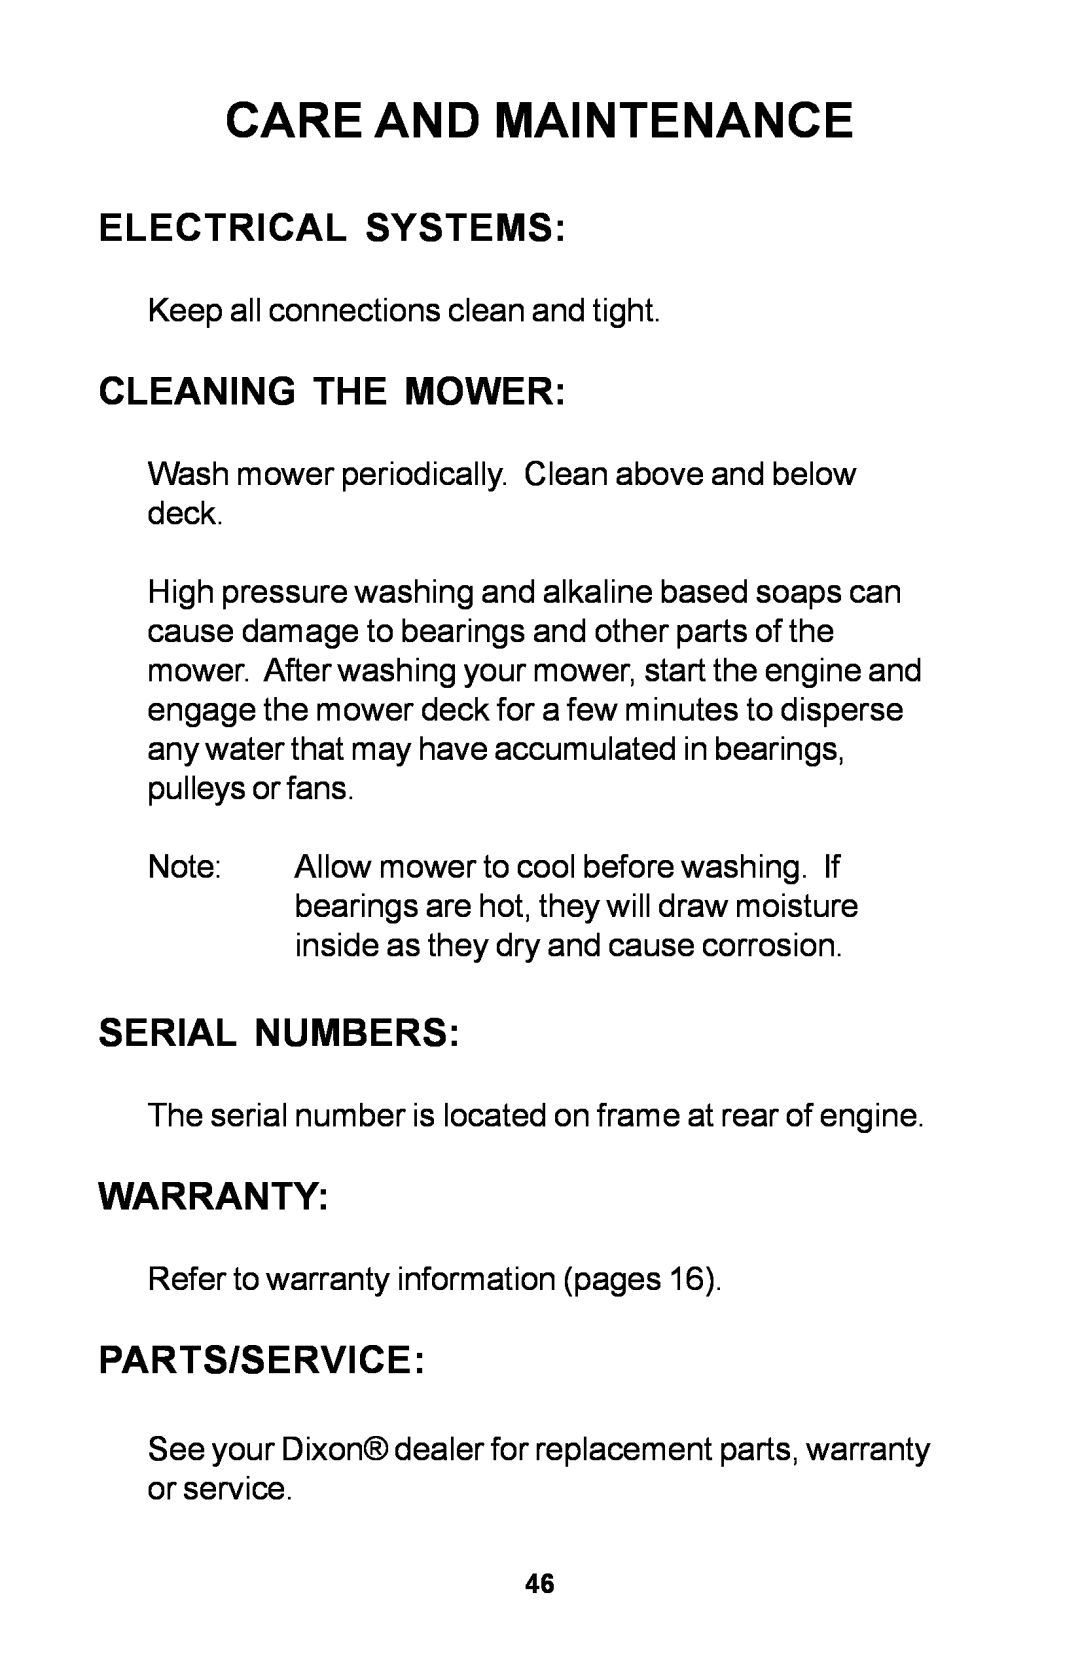 Dixon ZTR manual Electrical Systems, Cleaning The Mower, Serial Numbers, Warranty, Parts/Service, Care And Maintenance 